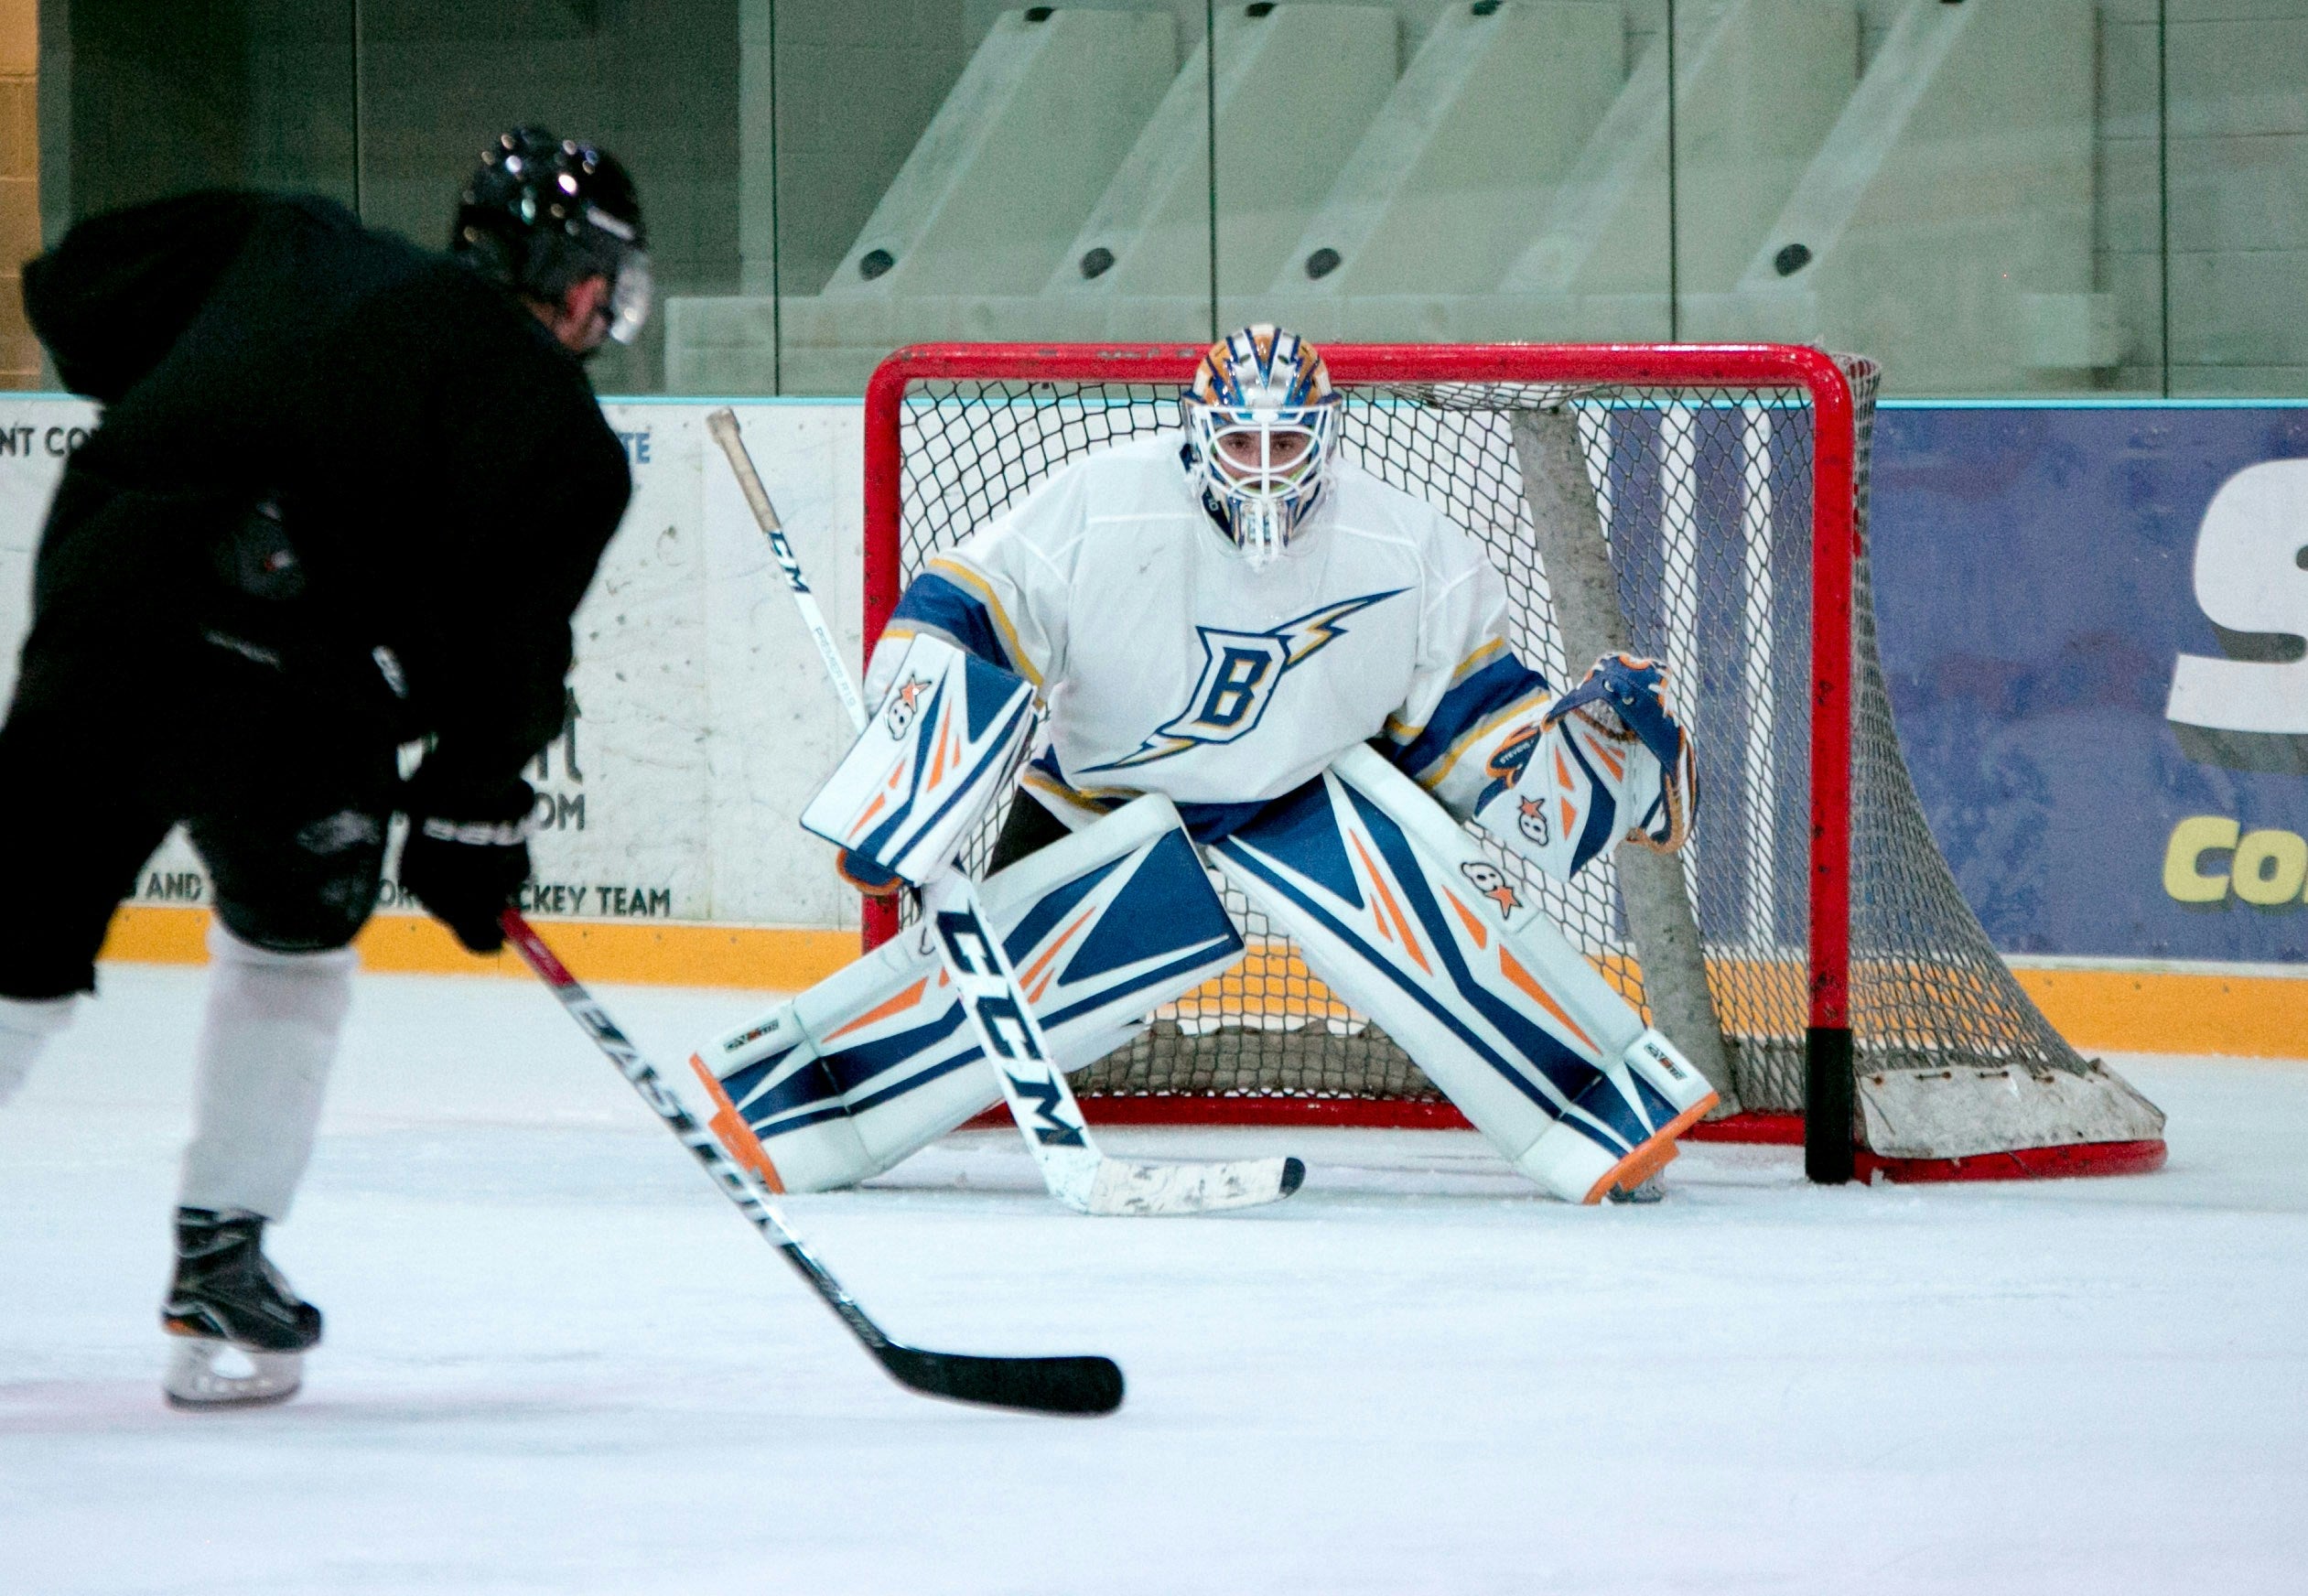 Goaltender Strategy: Analyzing Positioning, Reads, and Reactions in the Crease